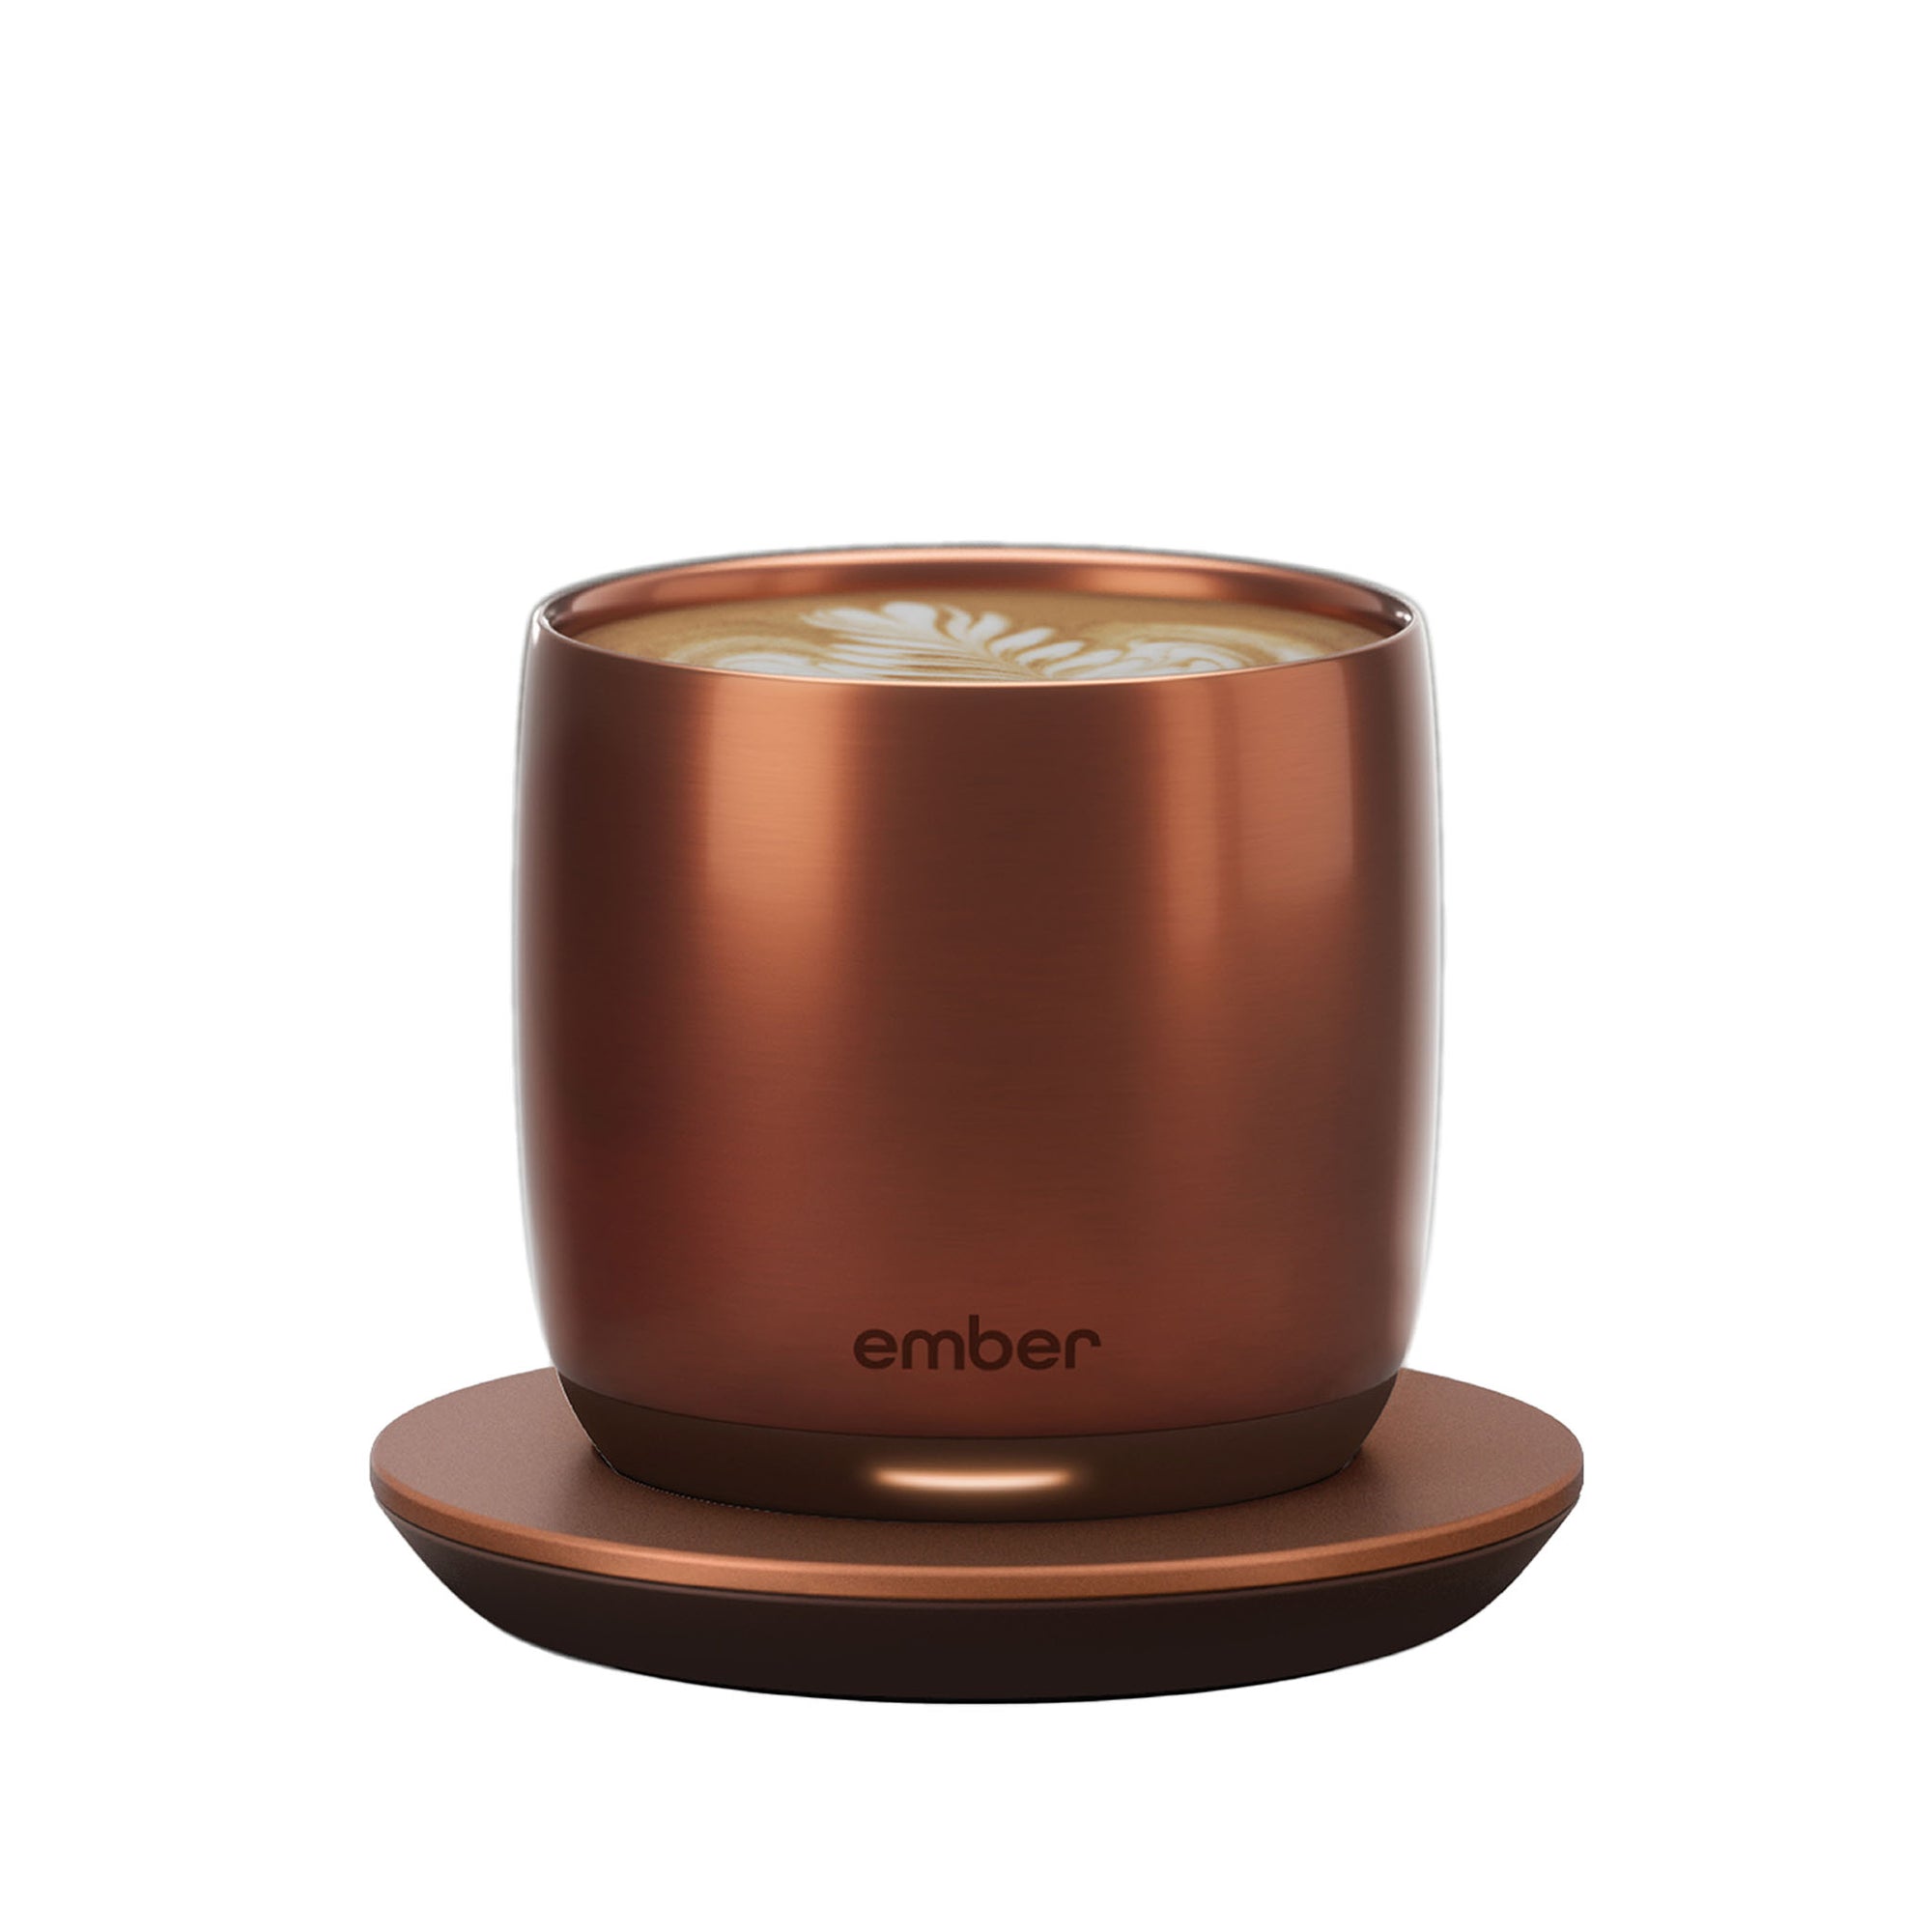 Electric Coffee Cup Copper 6oz /177ml - Ember